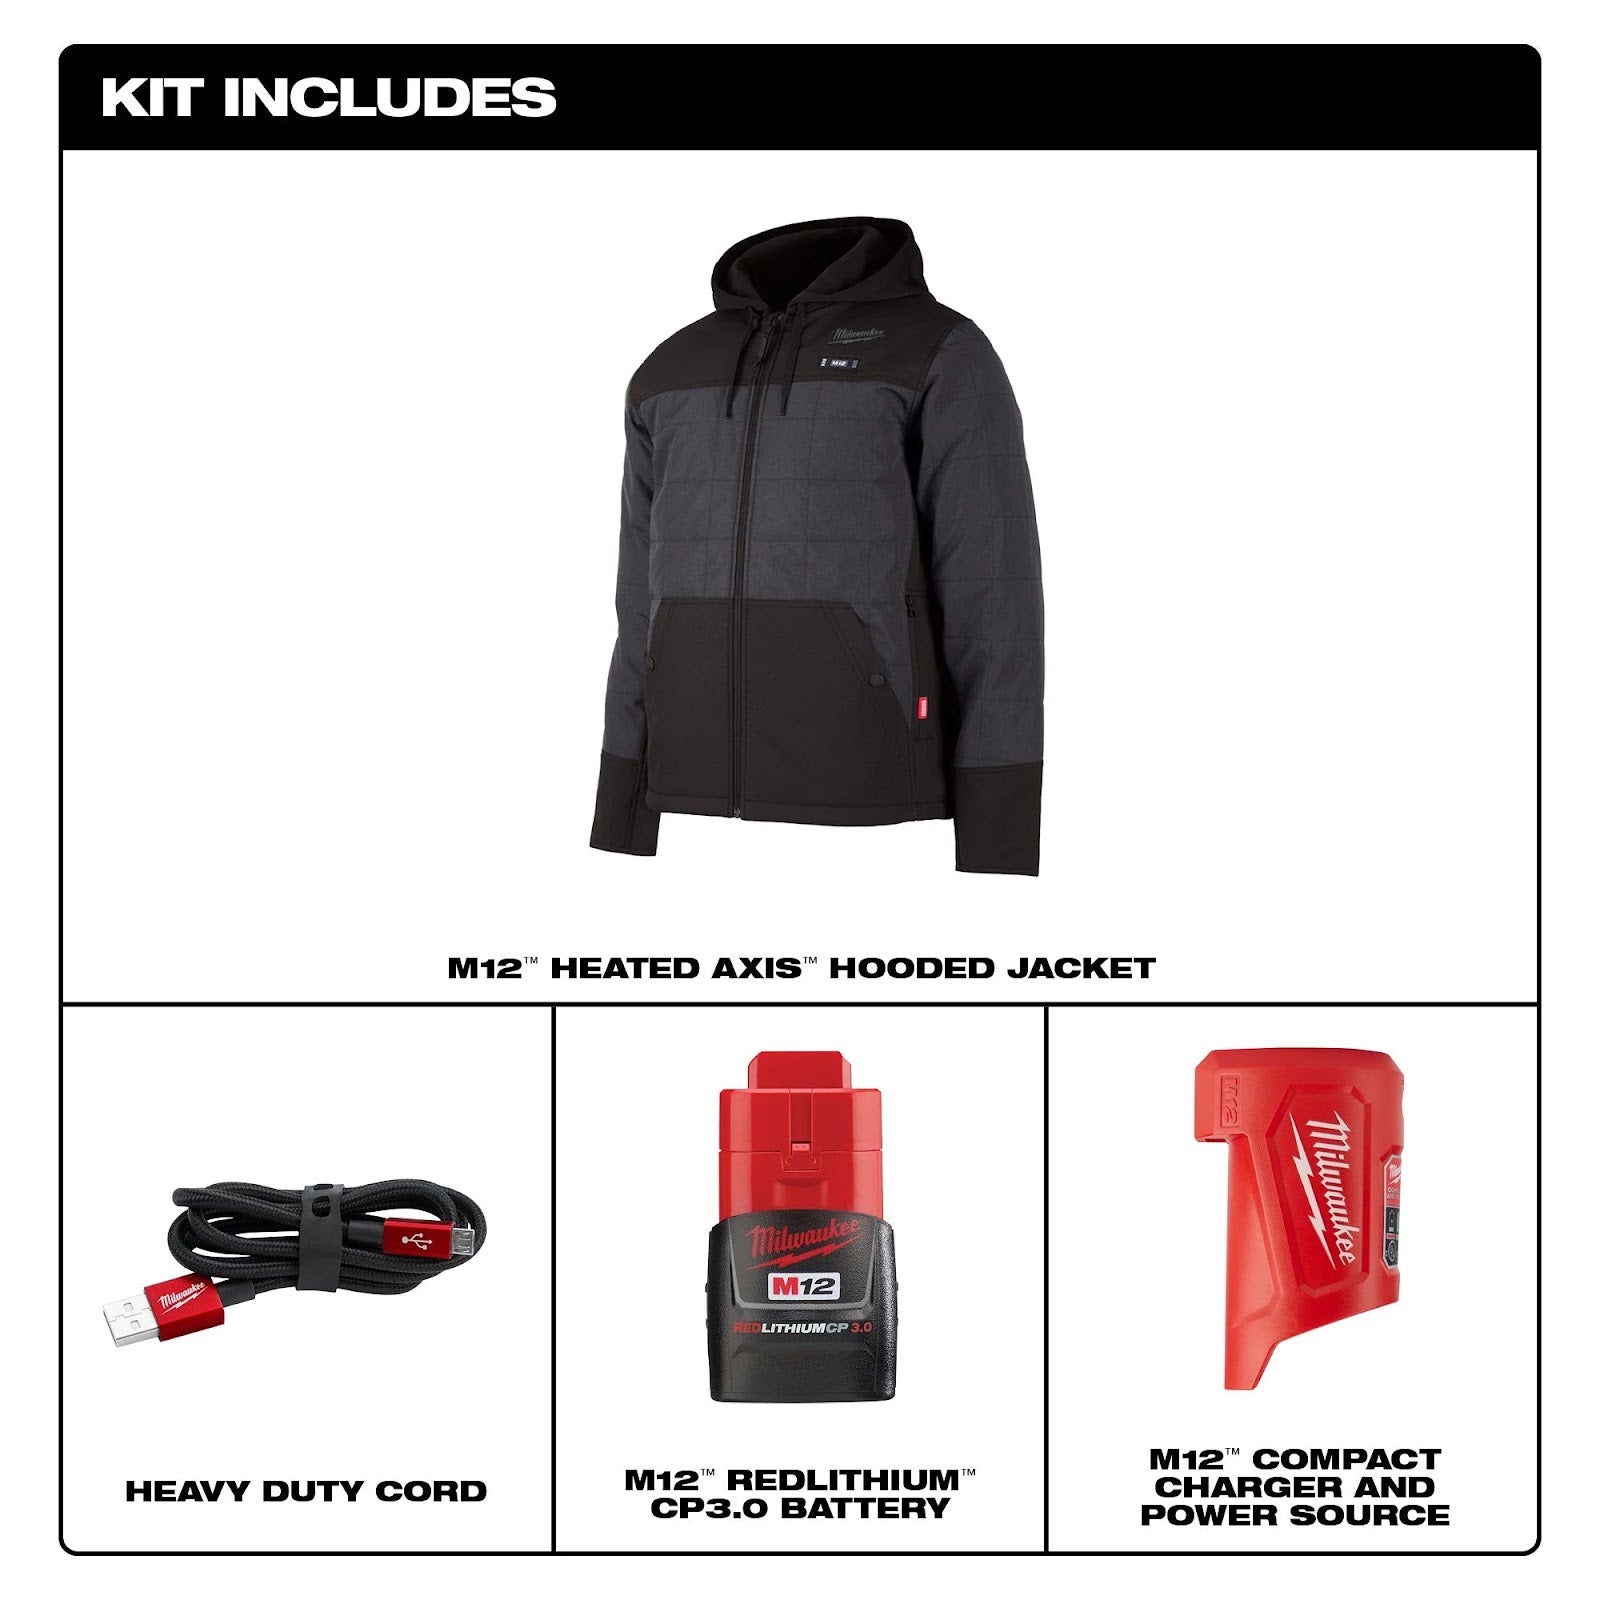 Contents of Heated AXIS Jacket: Jacket, Heavy Duty Cord, Battery, and Charger